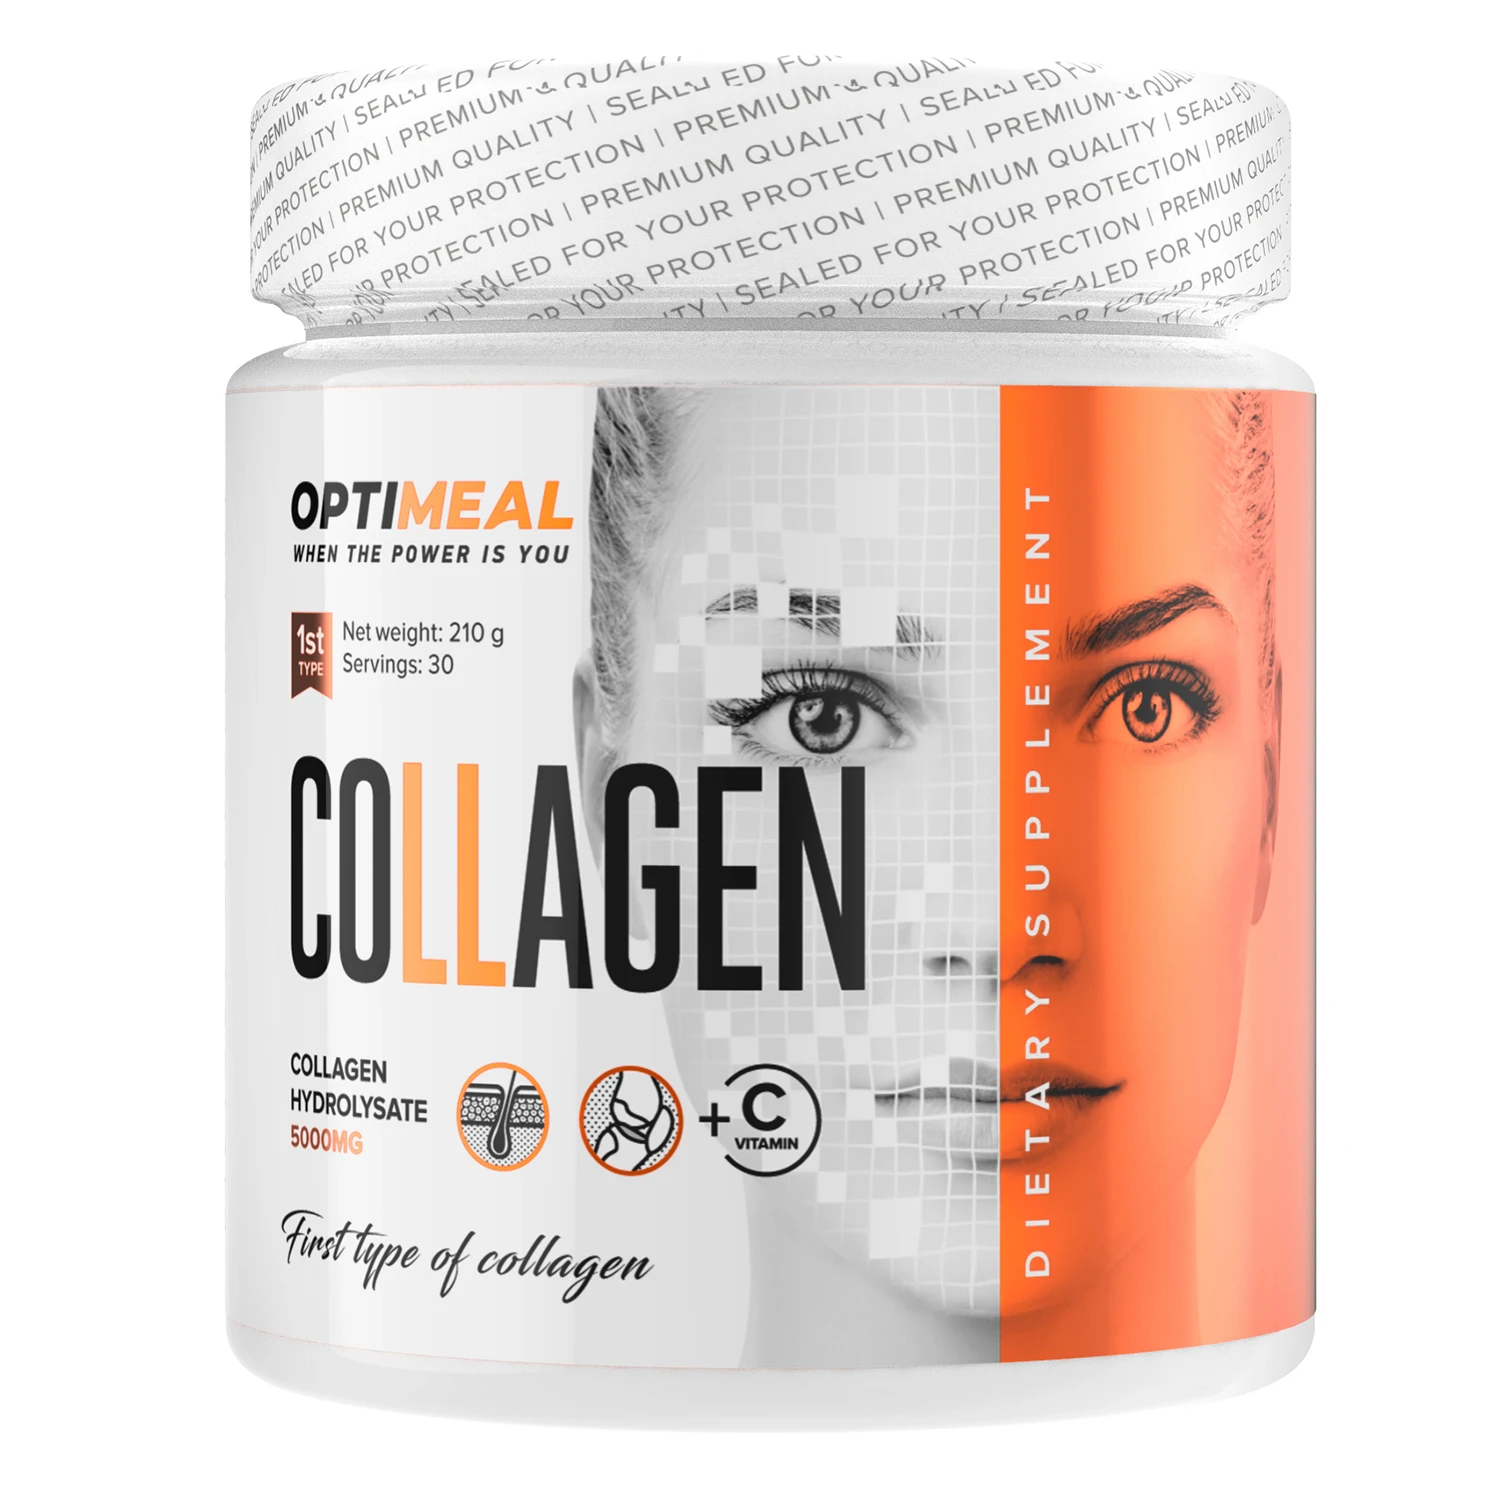 High Quality OptiMeal COLLAGEN powder health and beauty drink, Orange Flavor, 30 servings (210 g pack), cheap factory price